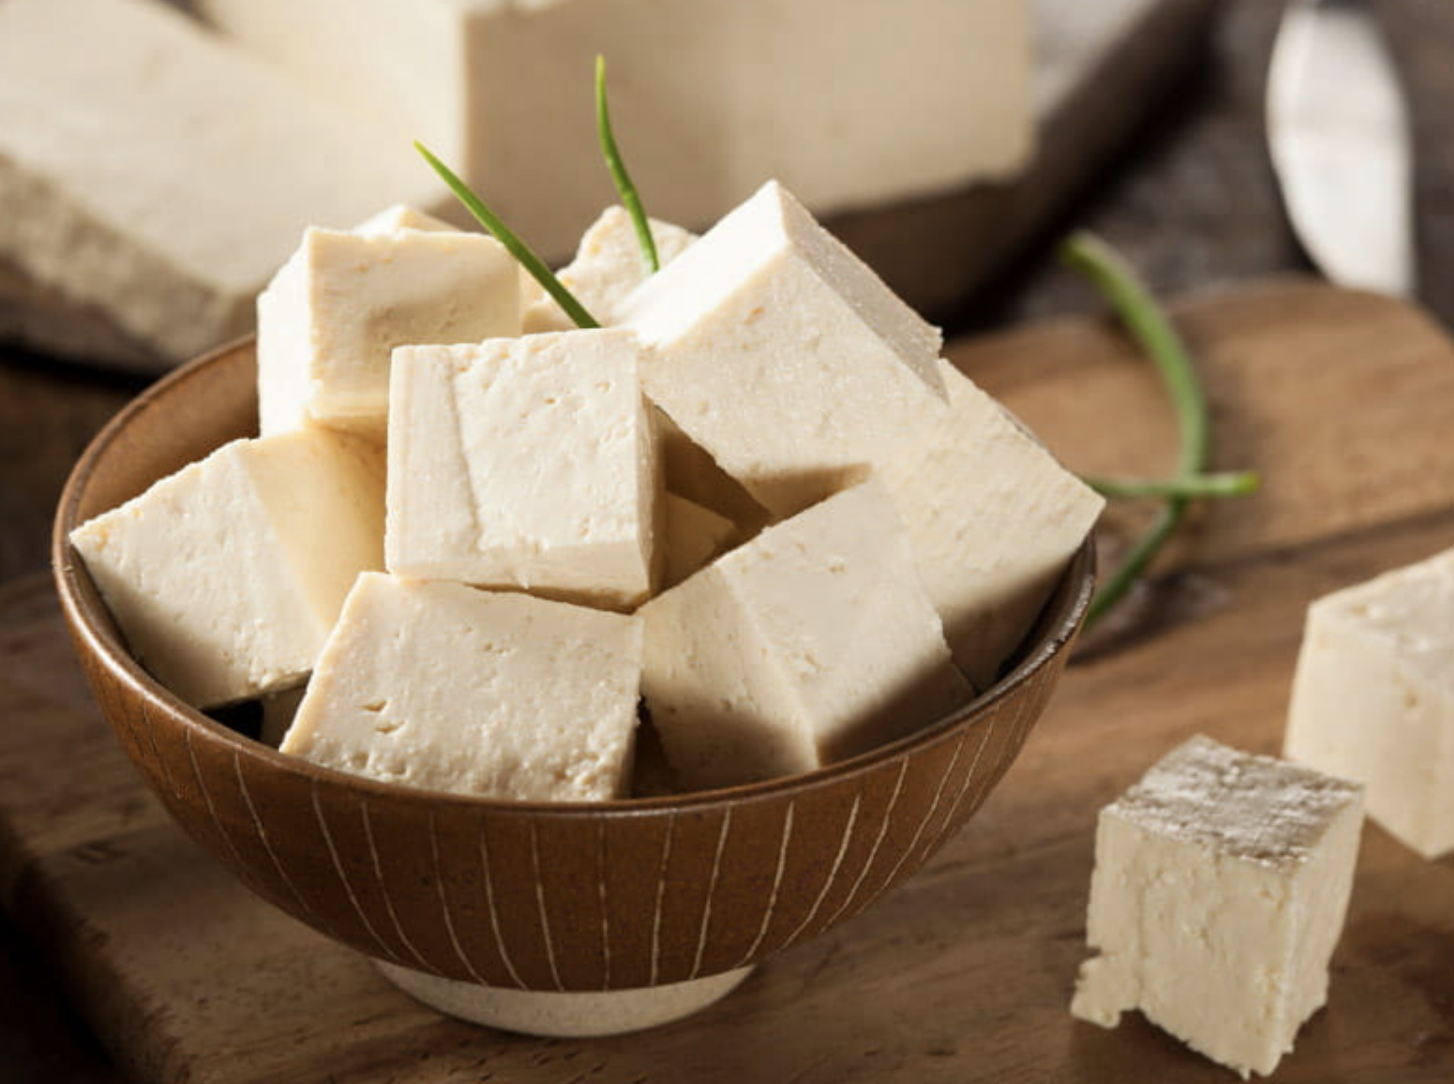 Clearing up questions on whether tofu is healthy